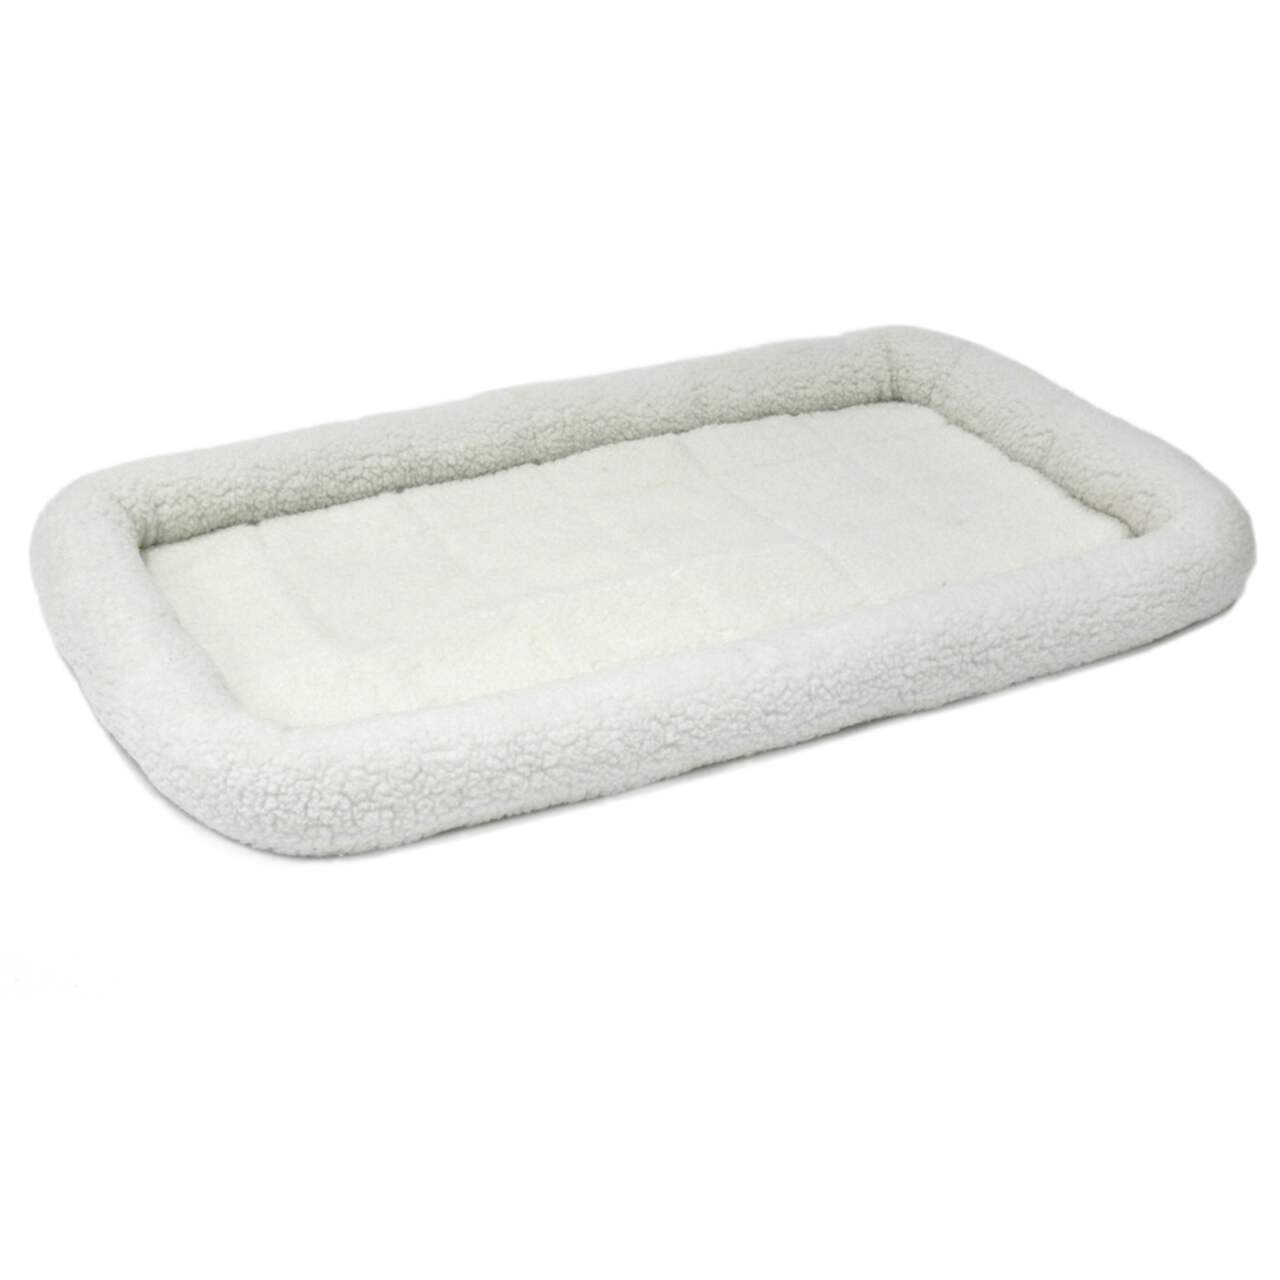 https://media-www.canadiantire.ca/product/living/pet-care/pet-accessories/0426661/comfyland-bed-24--1723304a-36c0-4c37-bb7b-aa1cfb08c6af.png?imdensity=1&imwidth=640&impolicy=mZoom